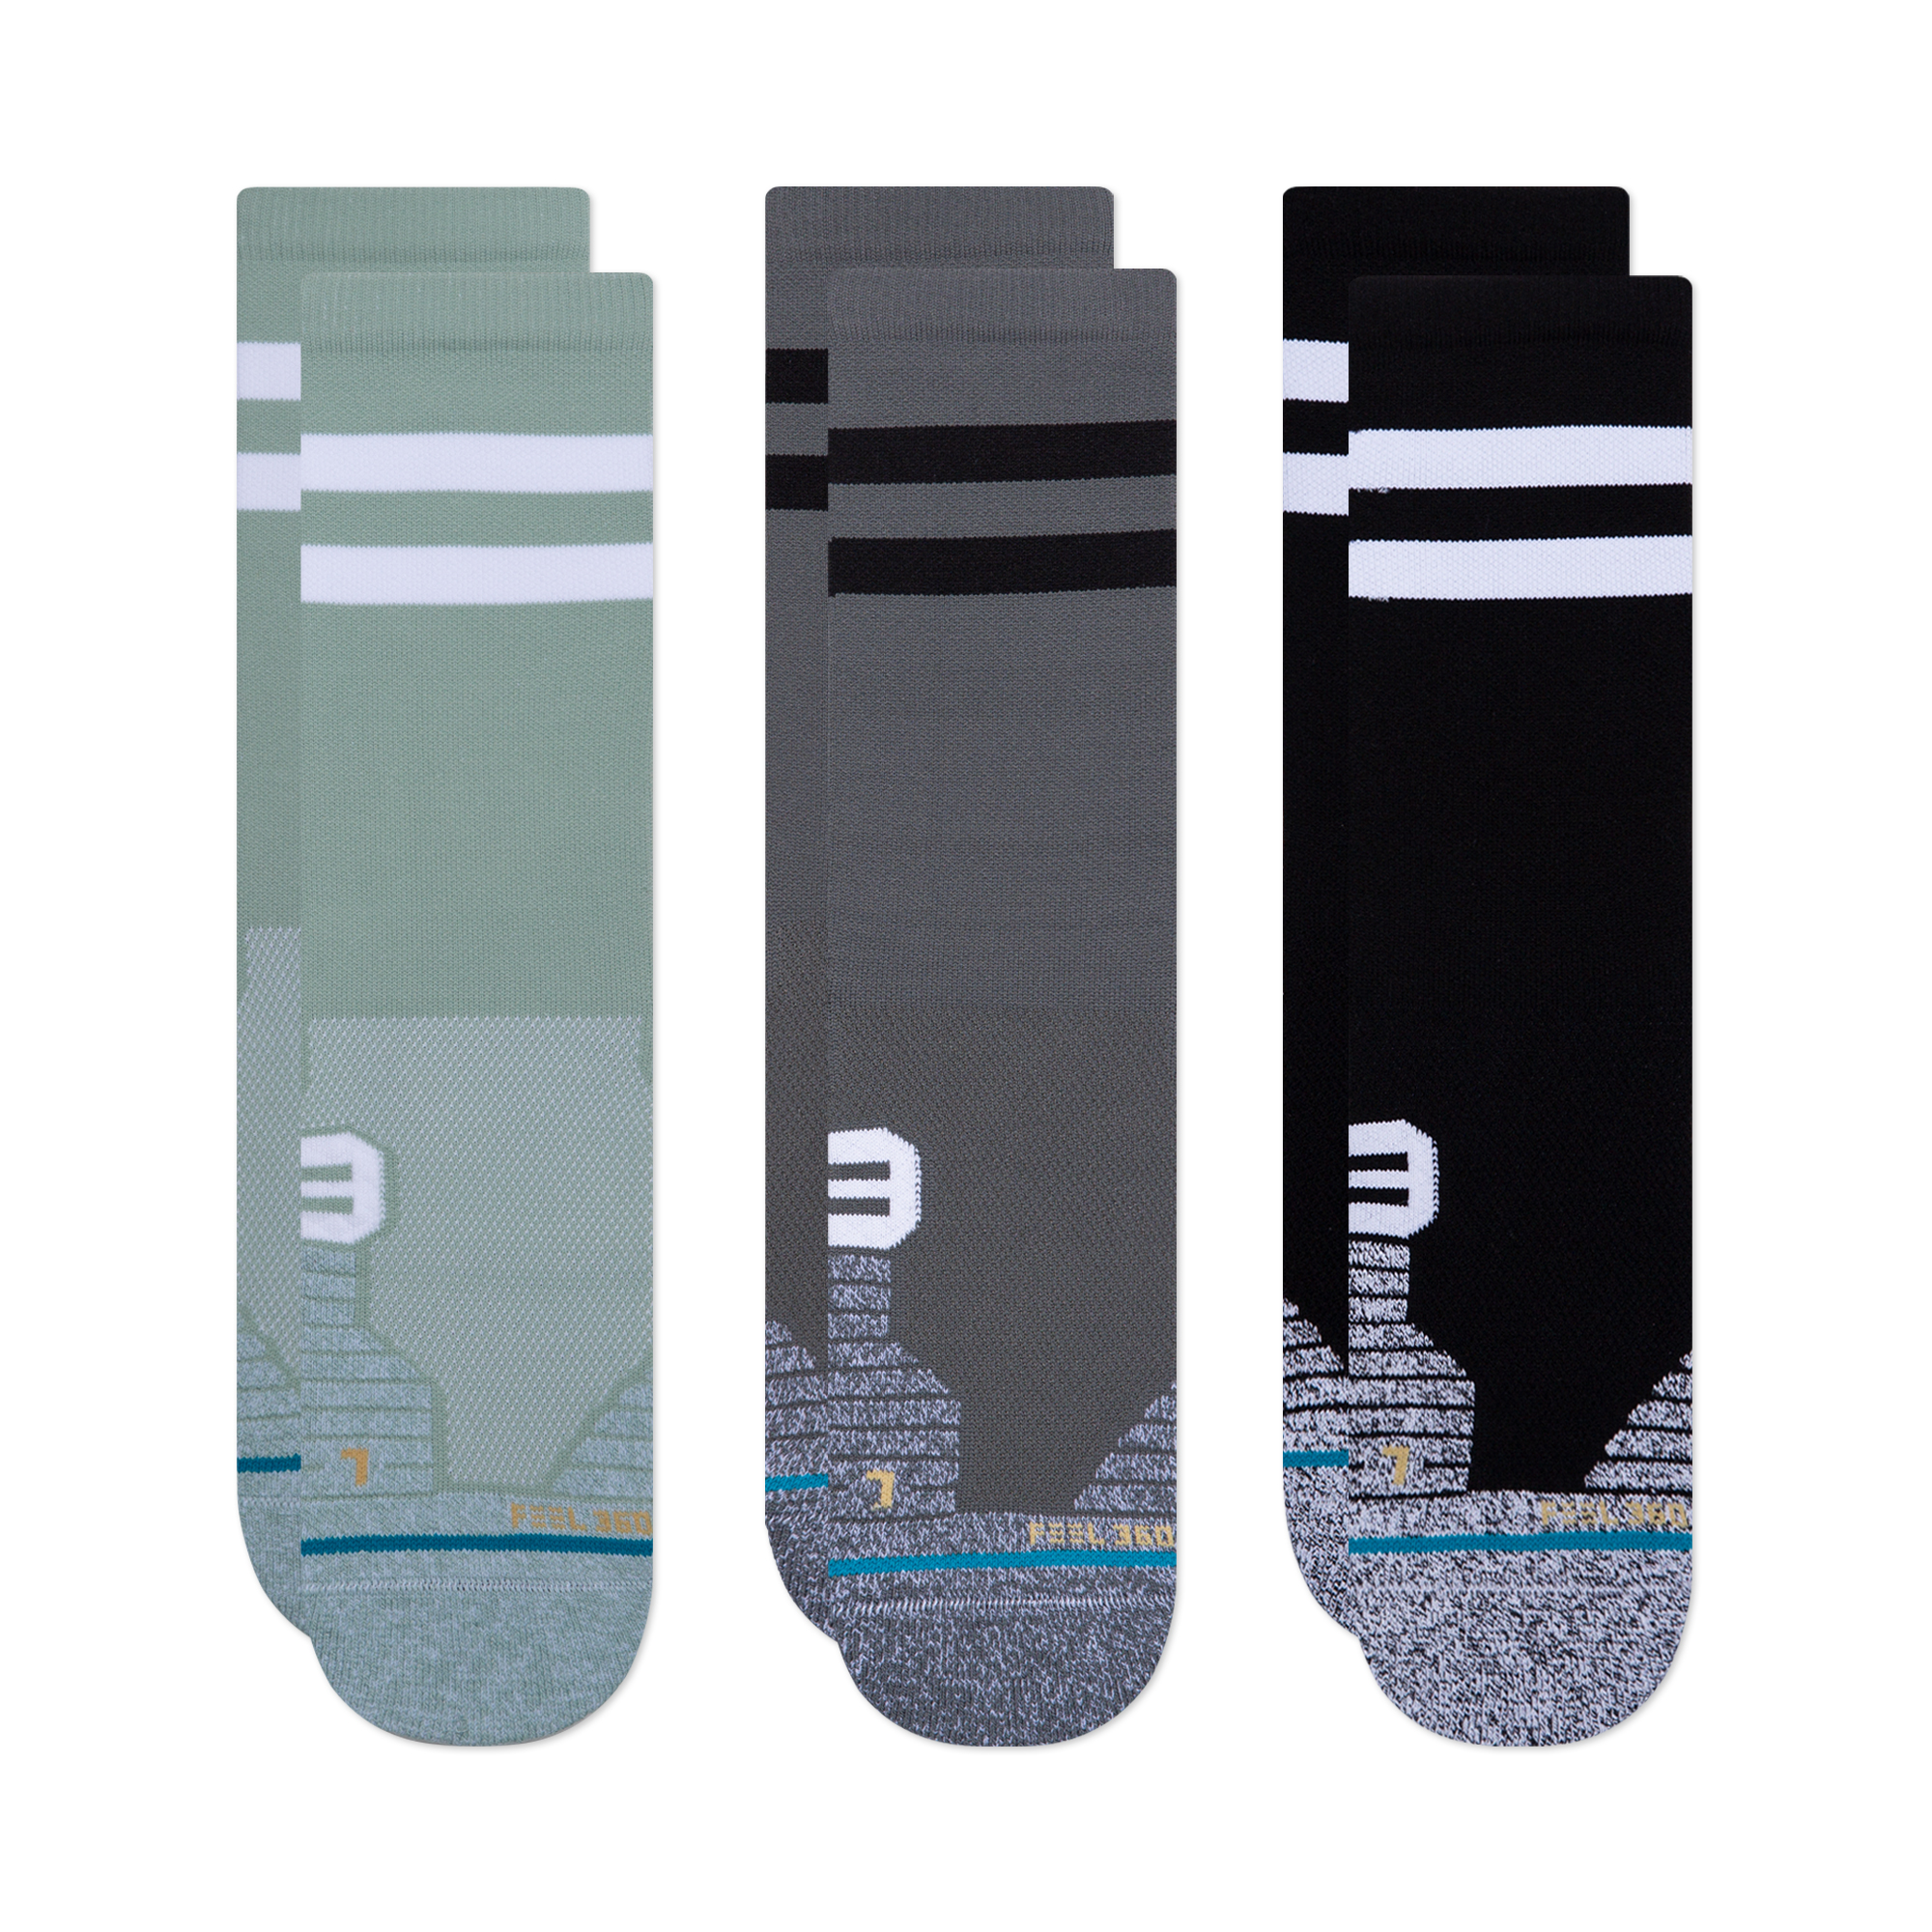 Stance product image